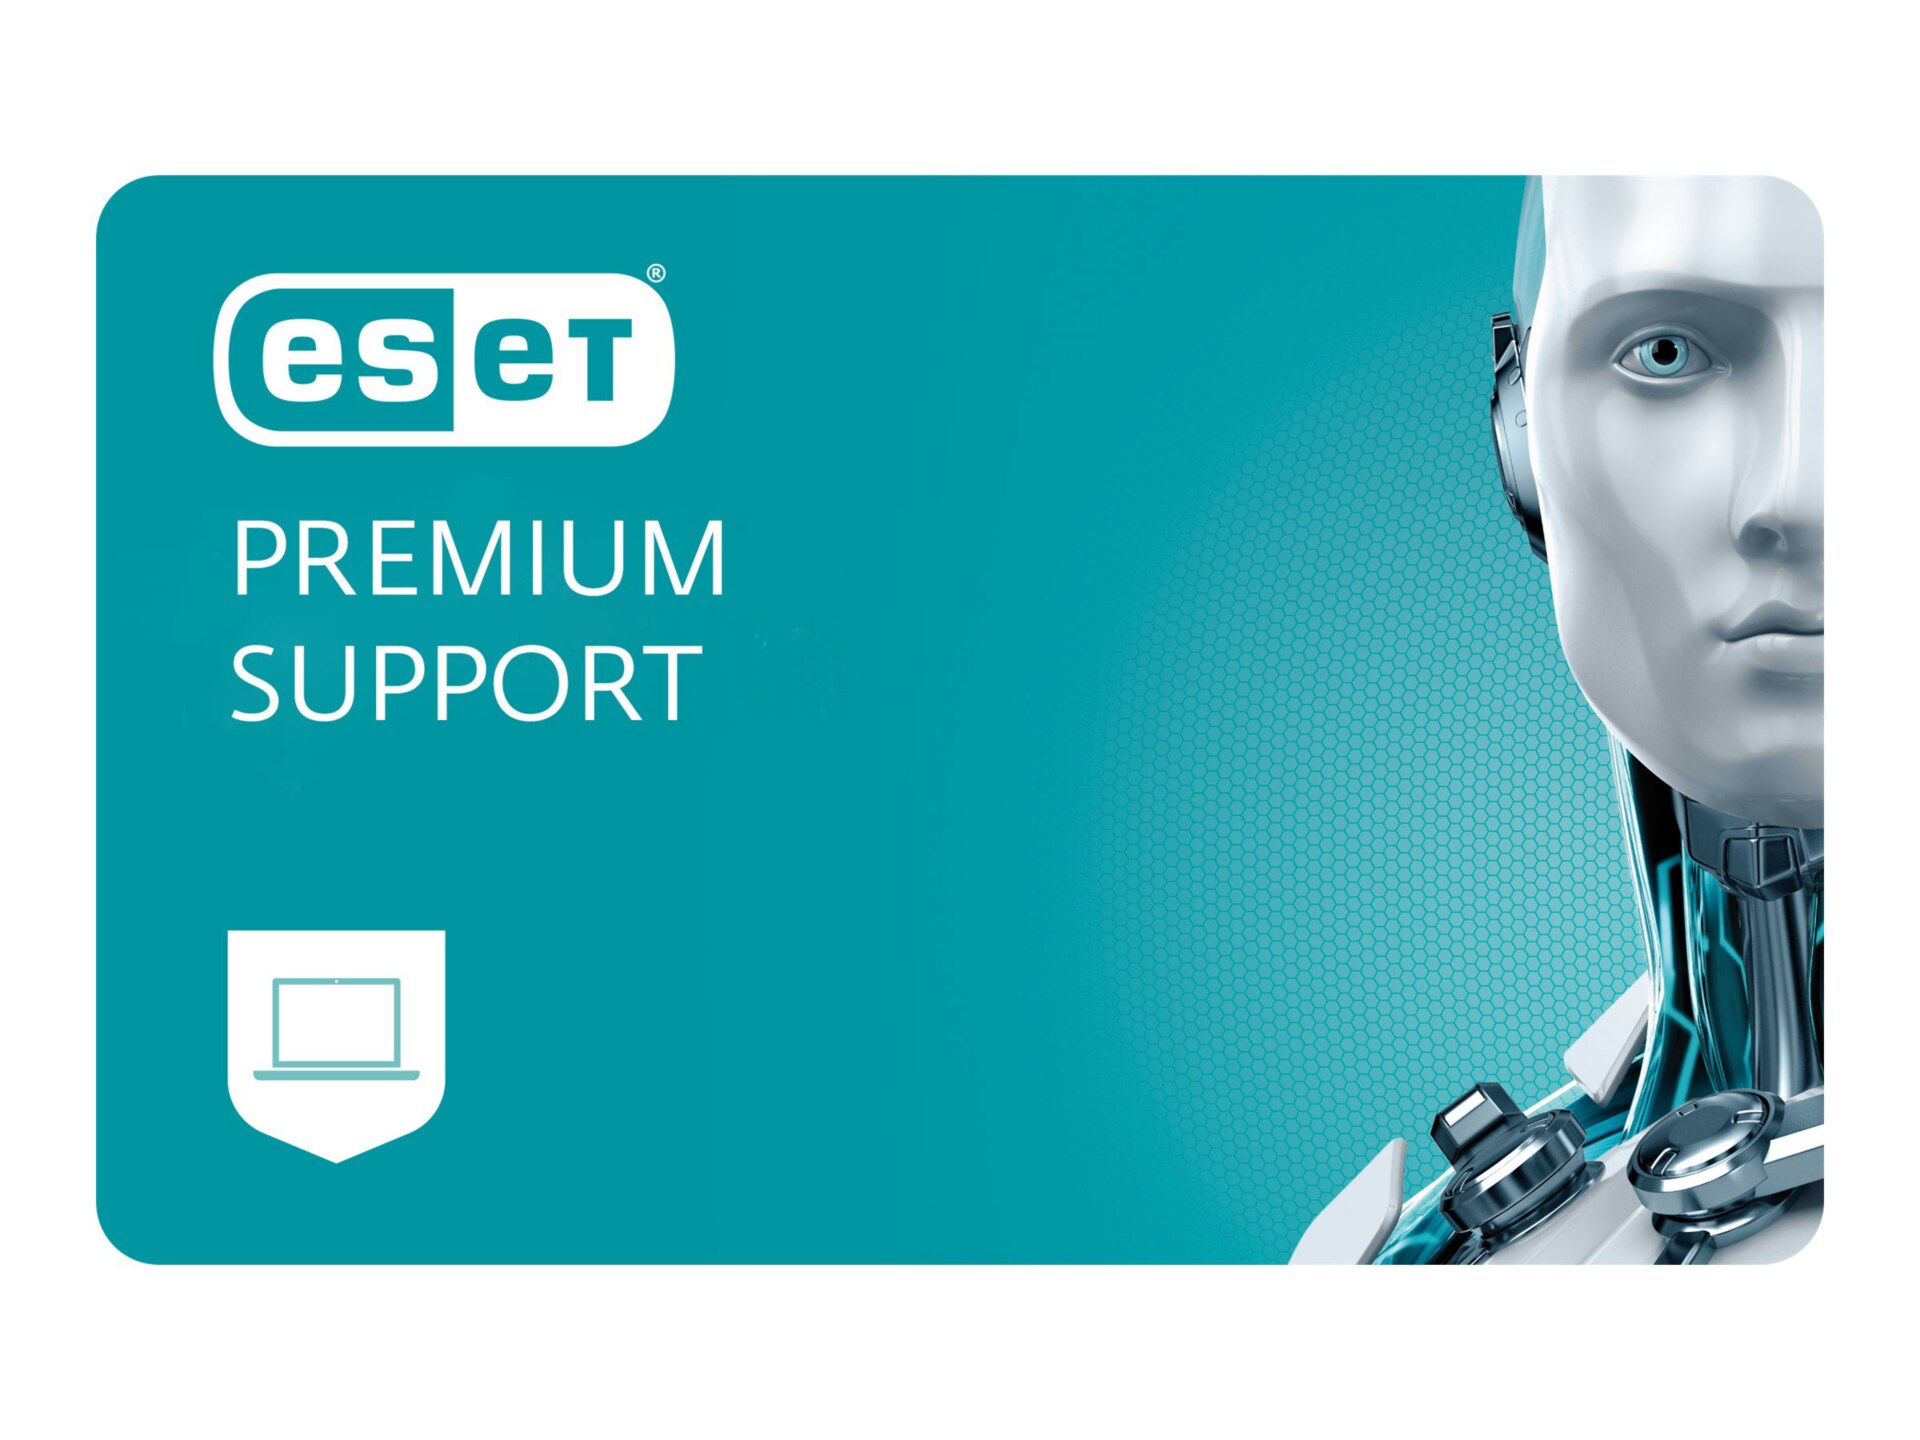 ESET Premium Support ADVANCED - technical support - 3 years